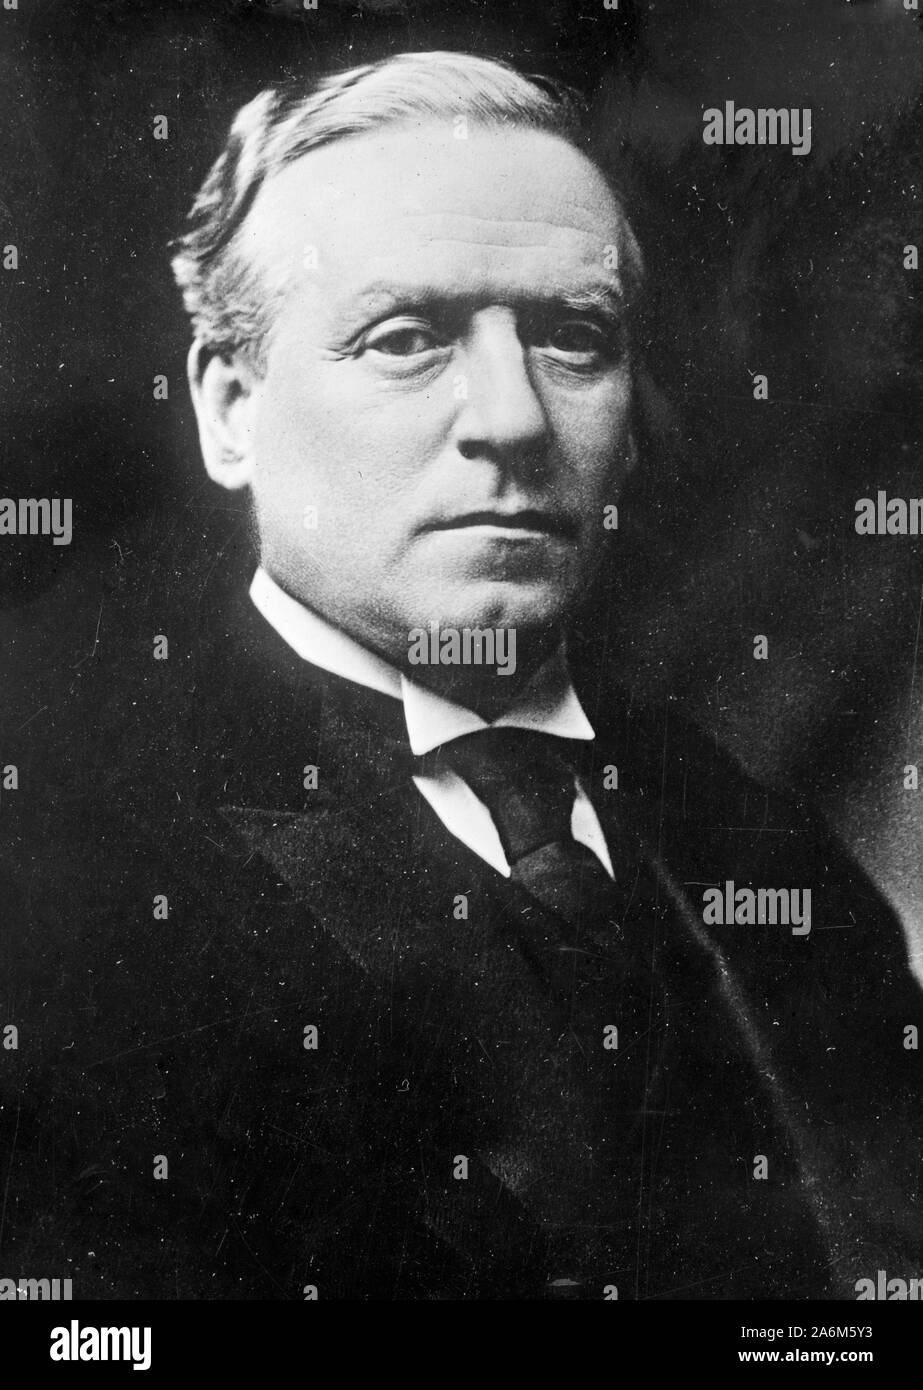 Asquith, Prime Minister H.H. Asquith, Liberal Prime Minister of the United Kingdom from 1908 to 1916. Stock Photo